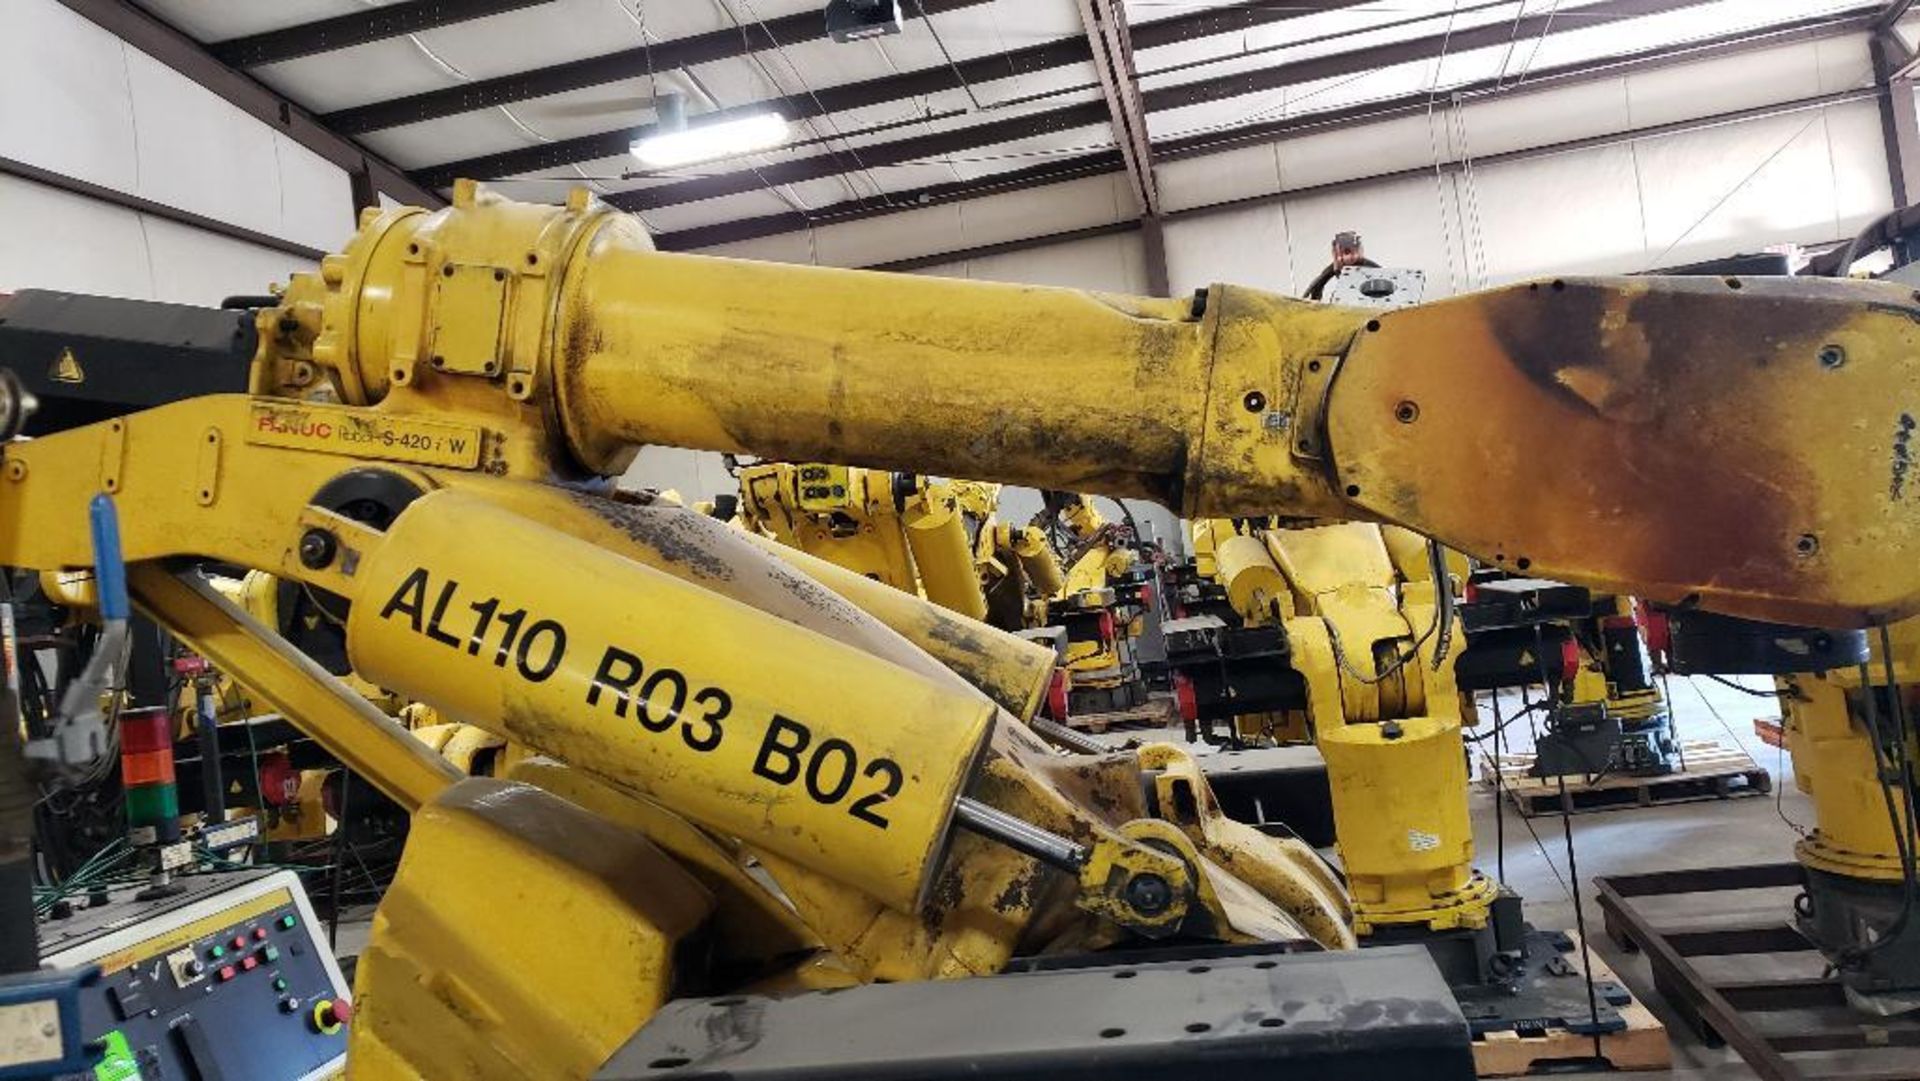 Fanuc S-420iW robot with R-J2 controller. - Image 11 of 15